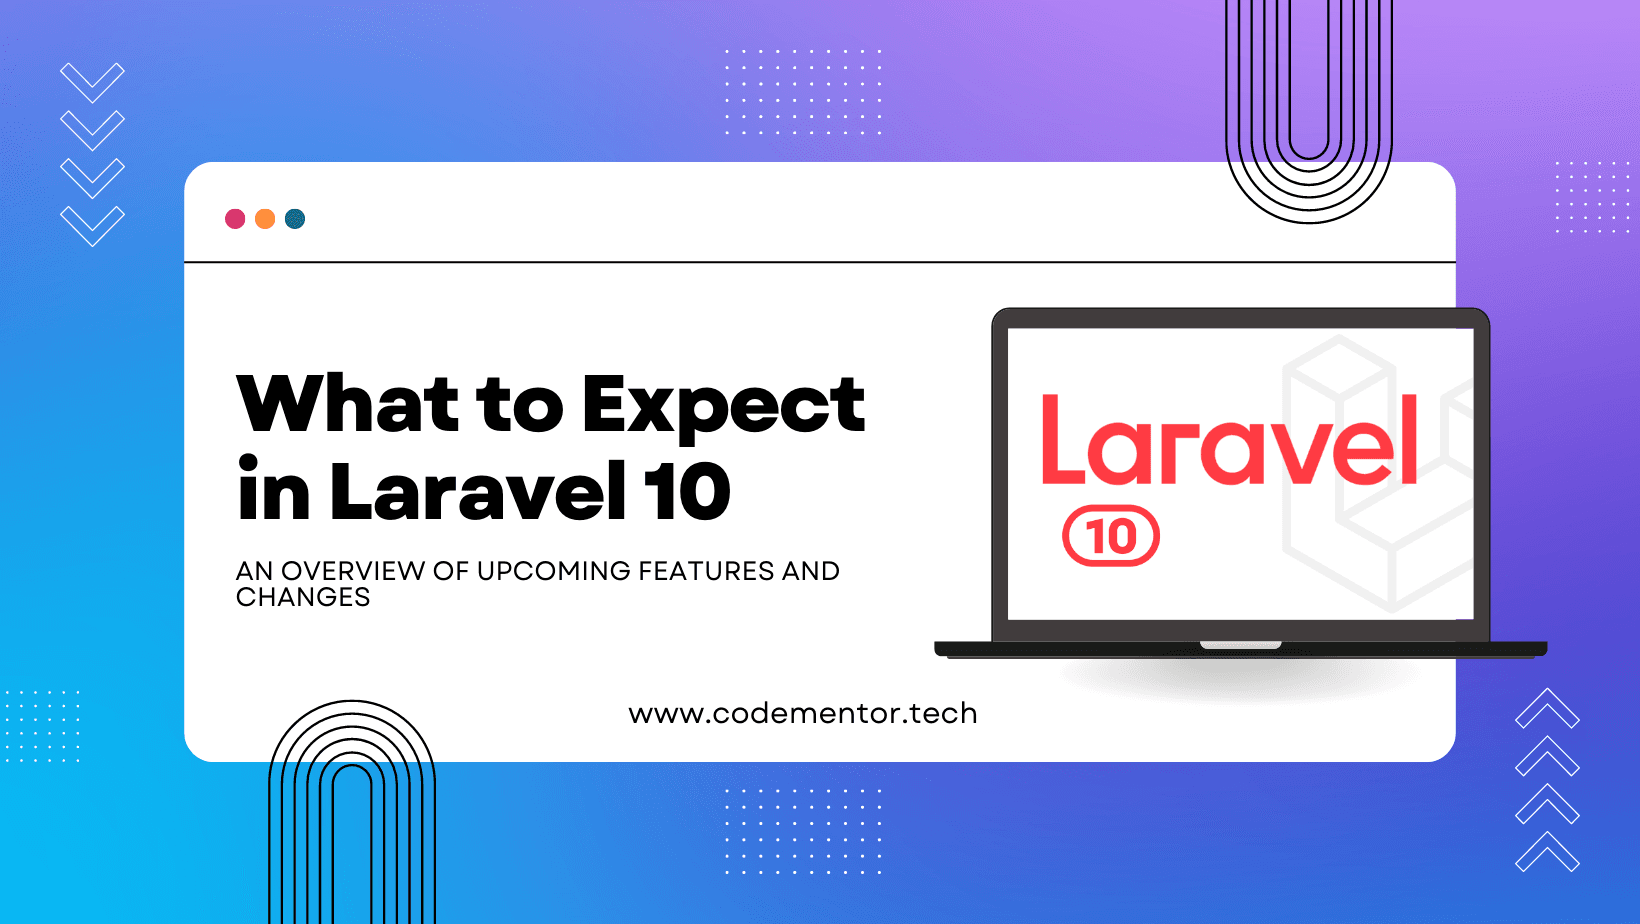 What to expect in laravel 10: An overview of upcoming features and changes - codementor.tech